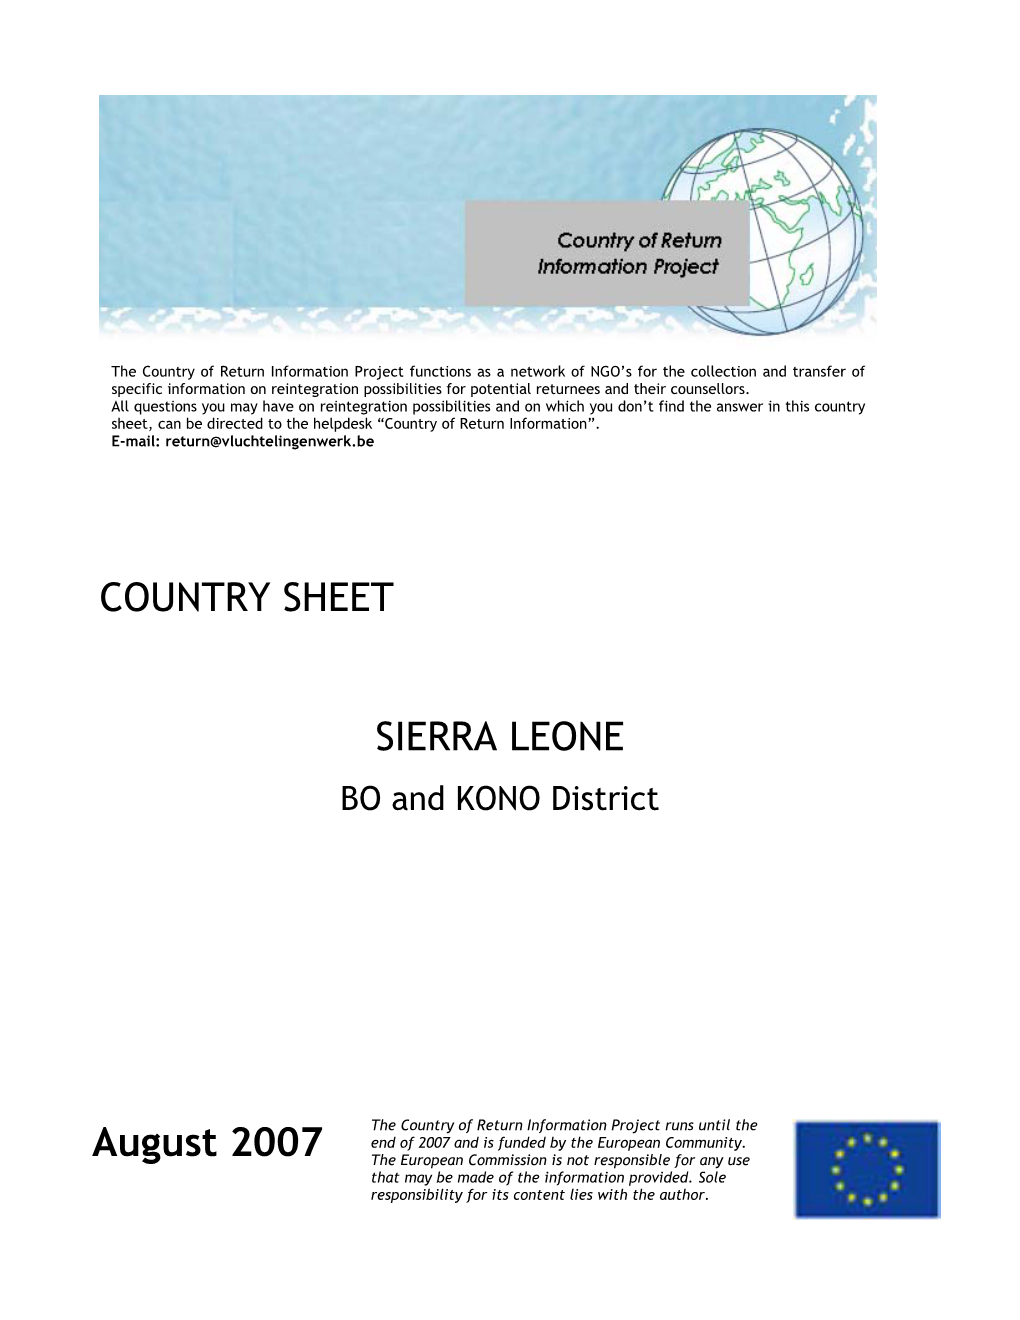 Report on Country of Return Information